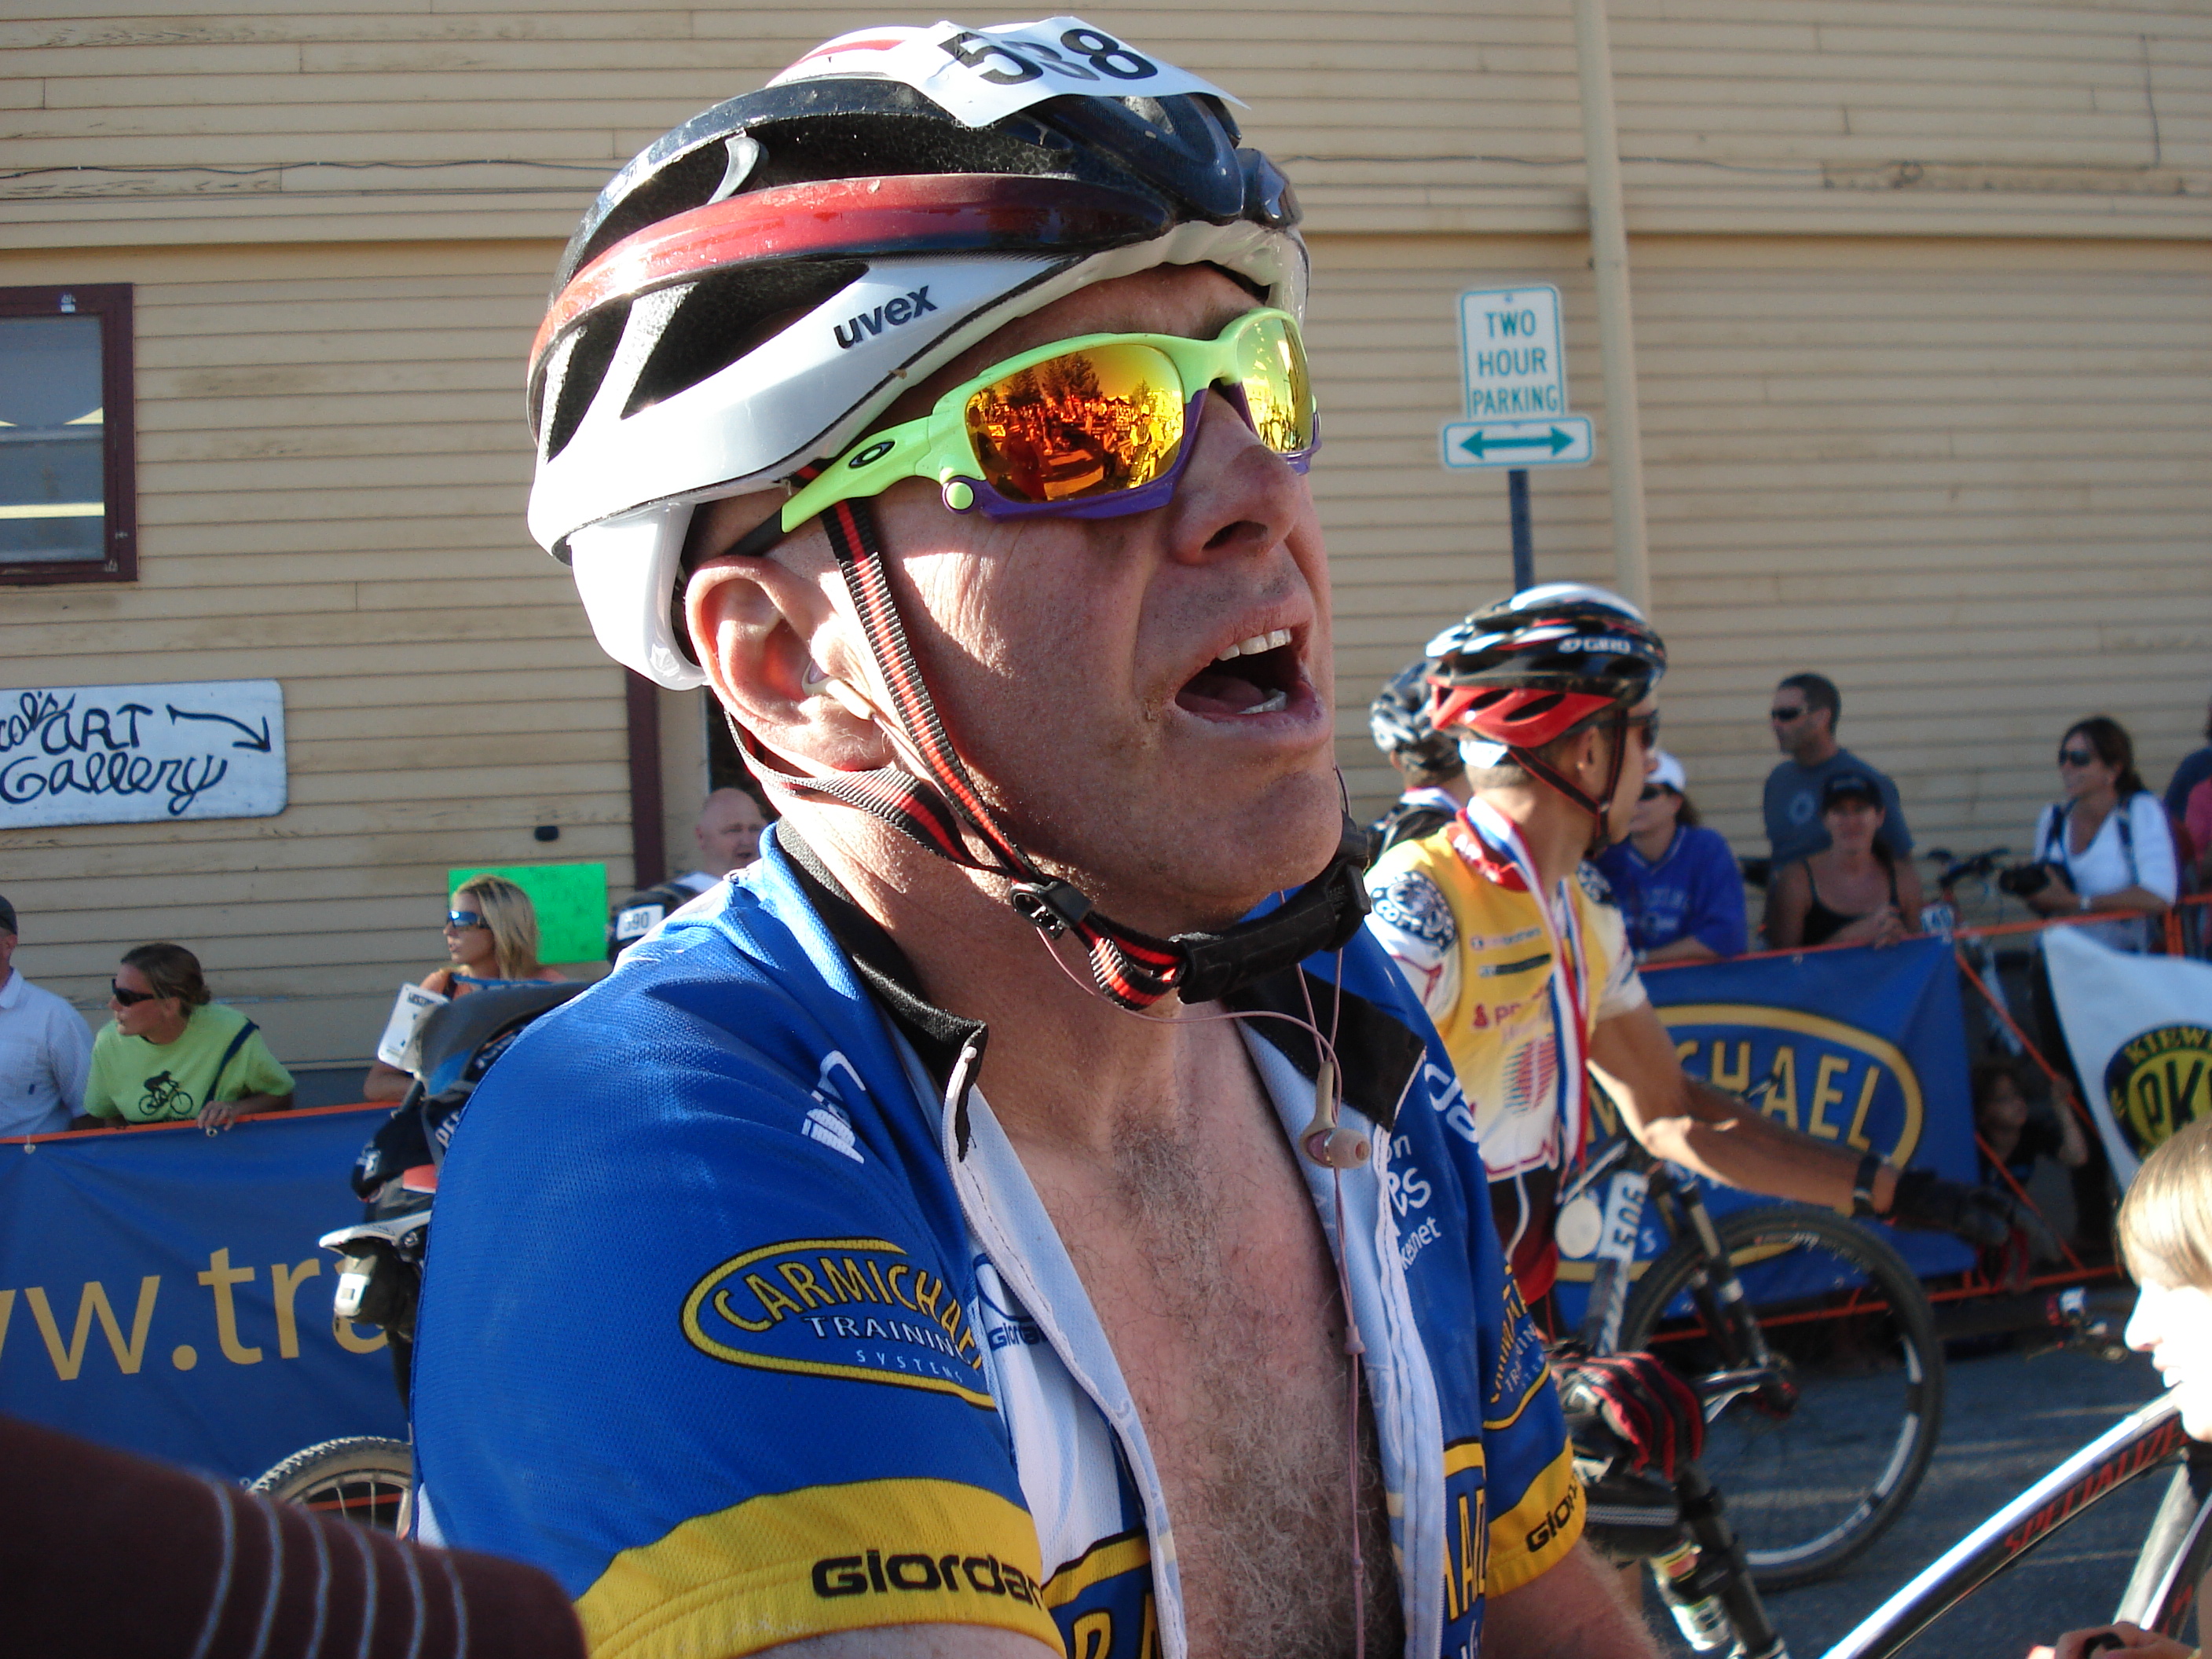 My first Leadville 100 finish in 2010. Eleven hours and forty two minutes of pain. My face shows it.